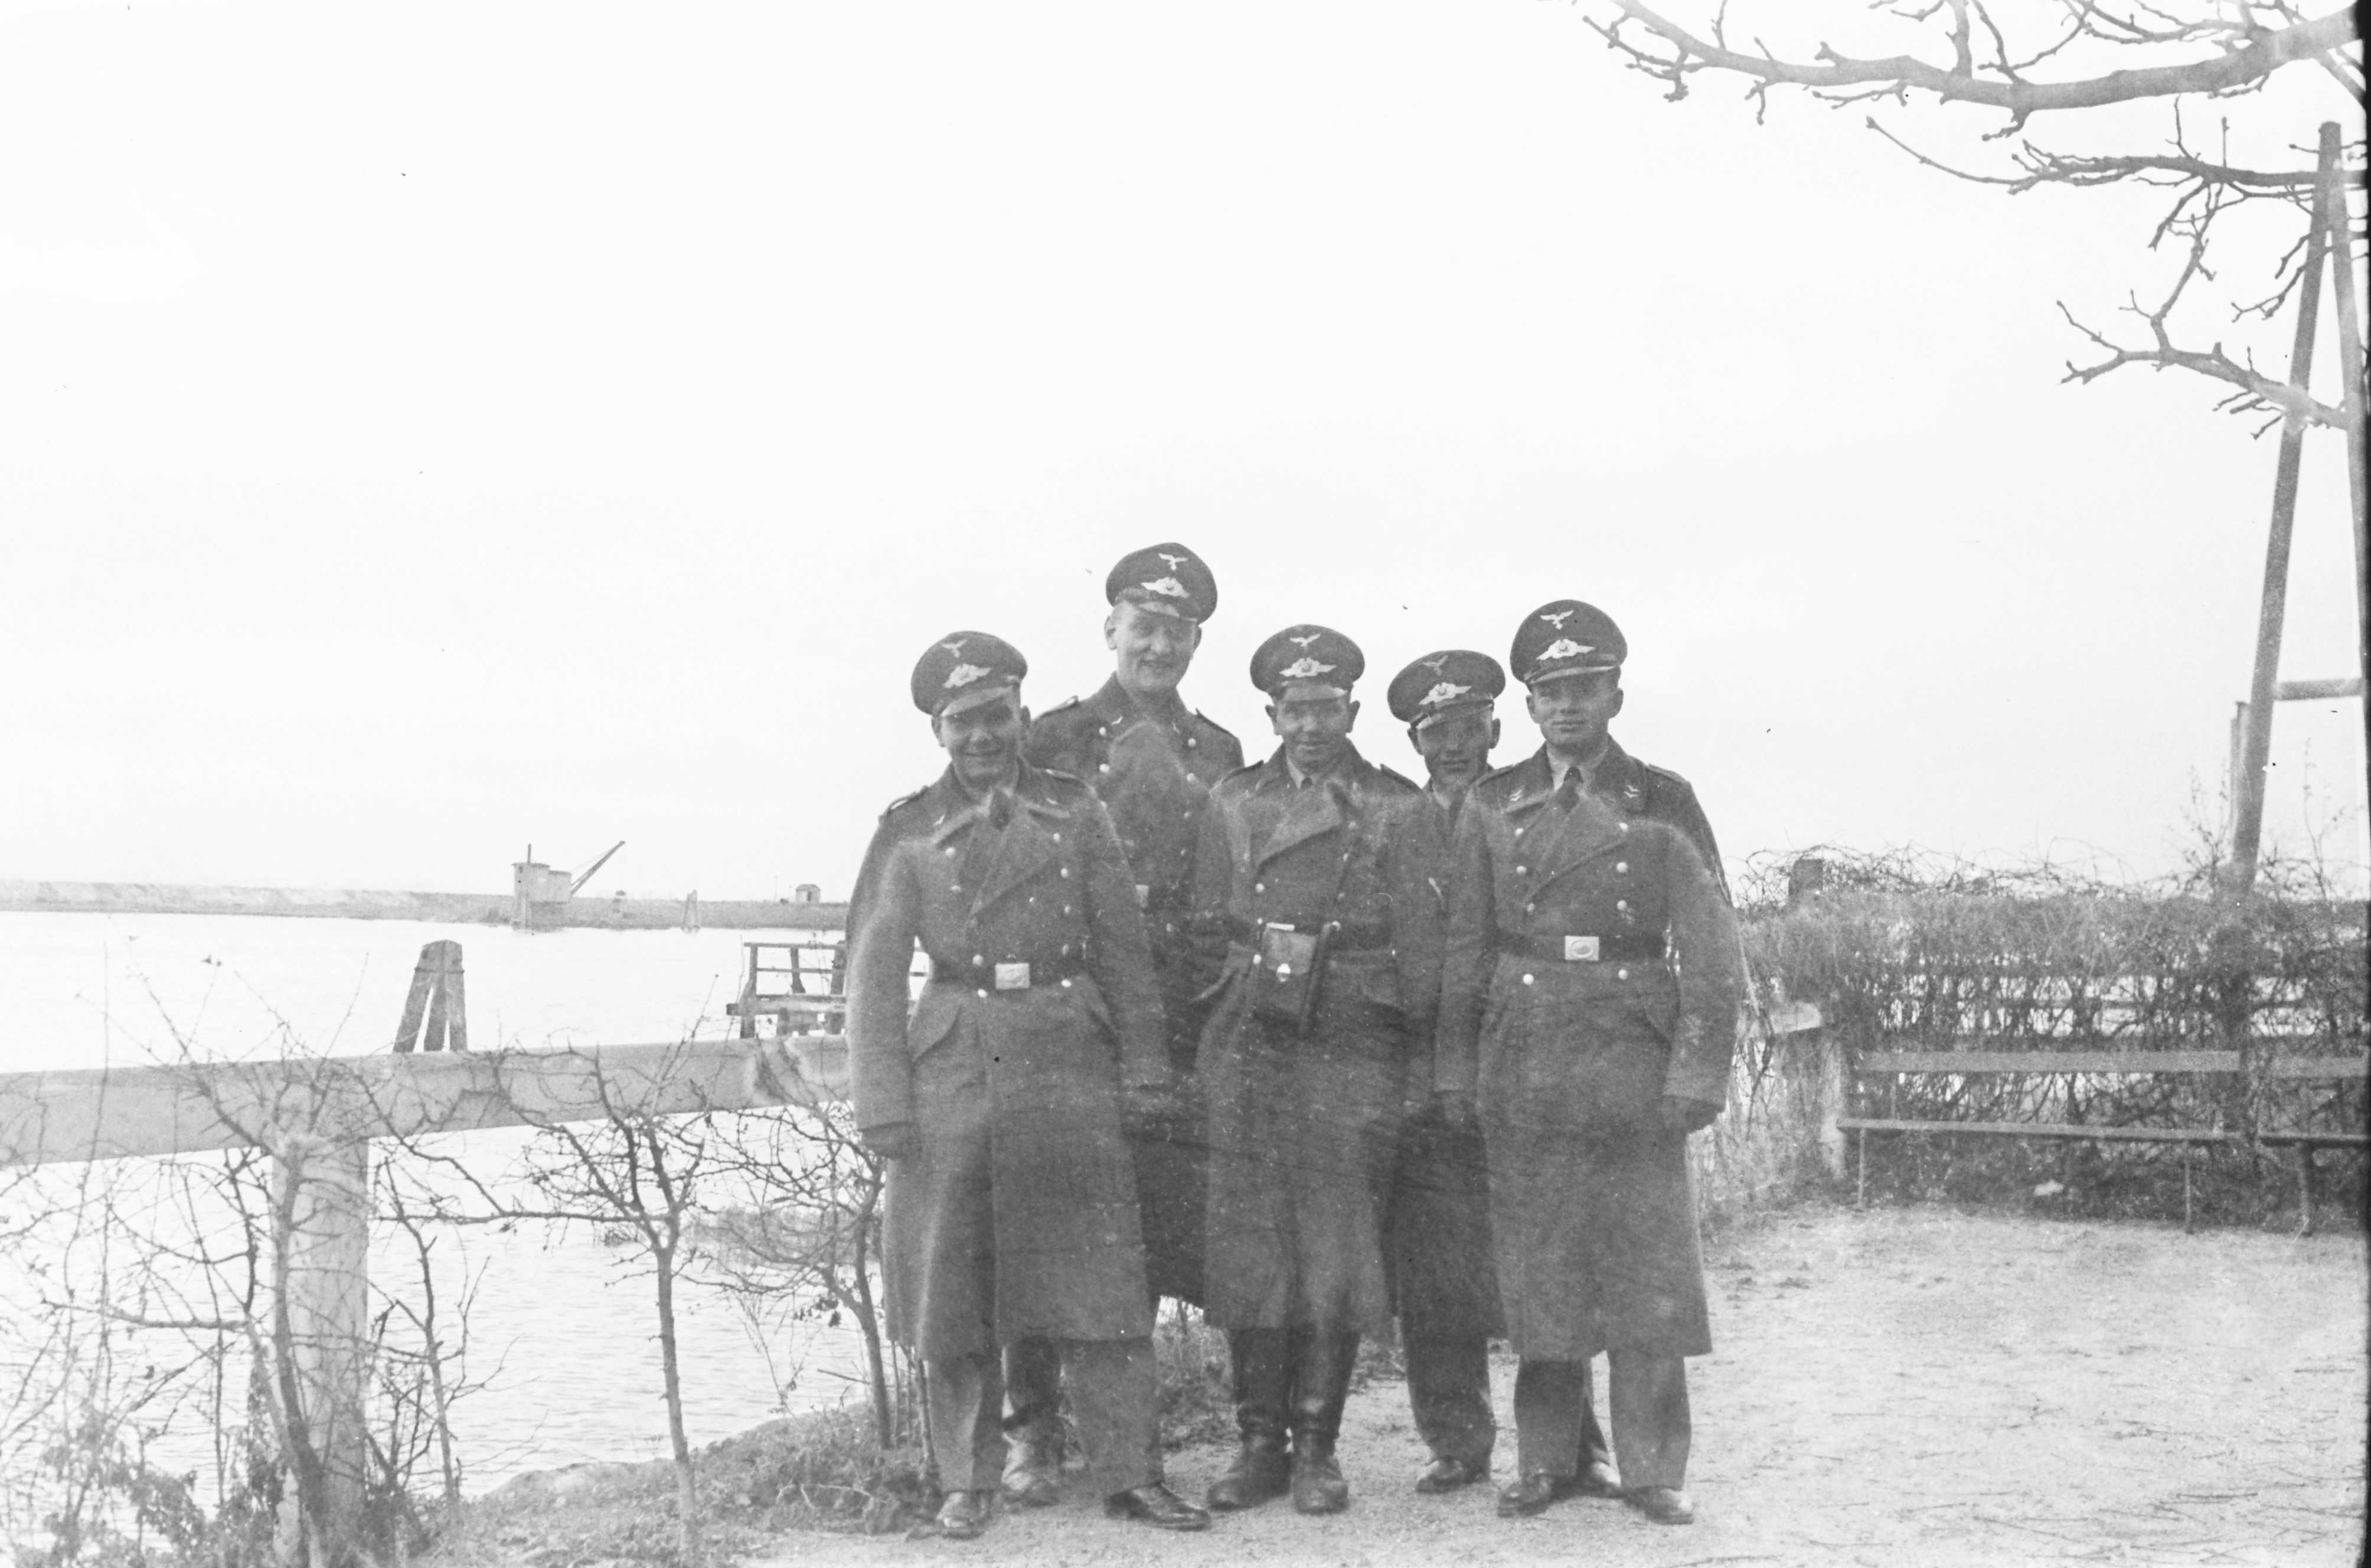 Luftwaffe soldiers at Curonian Spit, unknown photographer, 1944, source:File:Luftwaffe soldiers at Curonian Spit; group portrait at shore.jpg, (copyright expired)